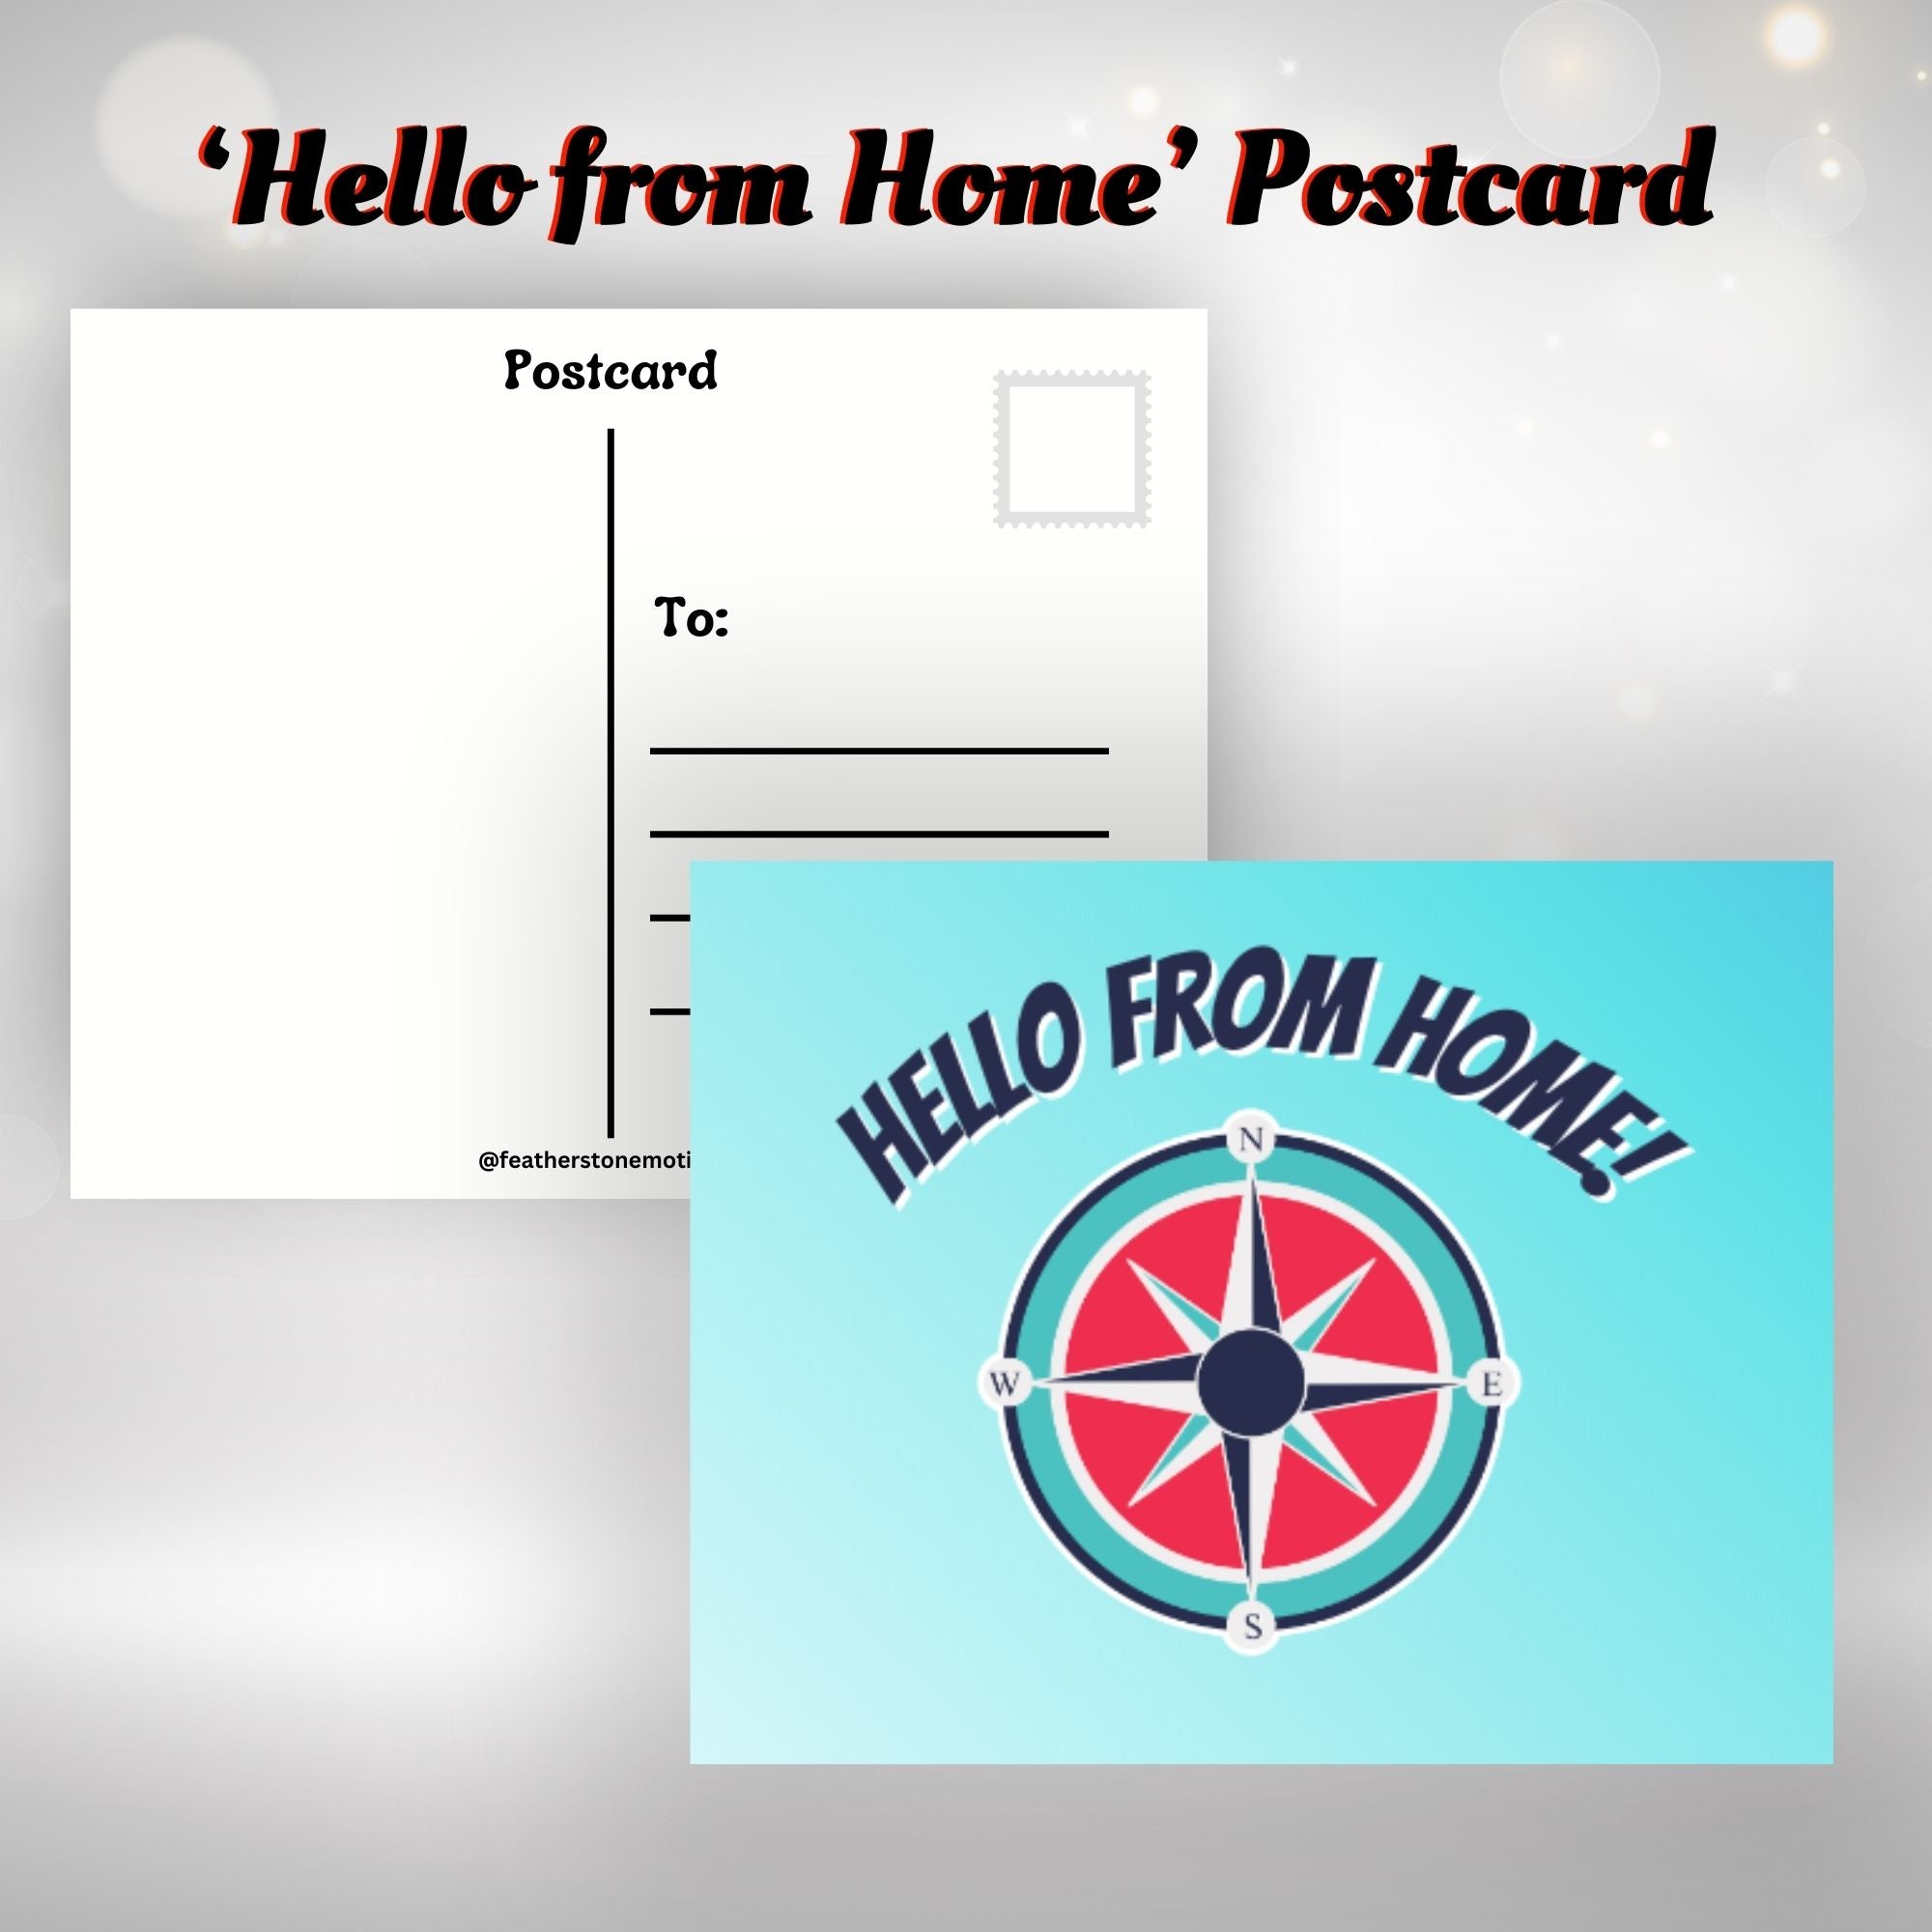 This image shows the Hello from Home! postcard with a compass on it.